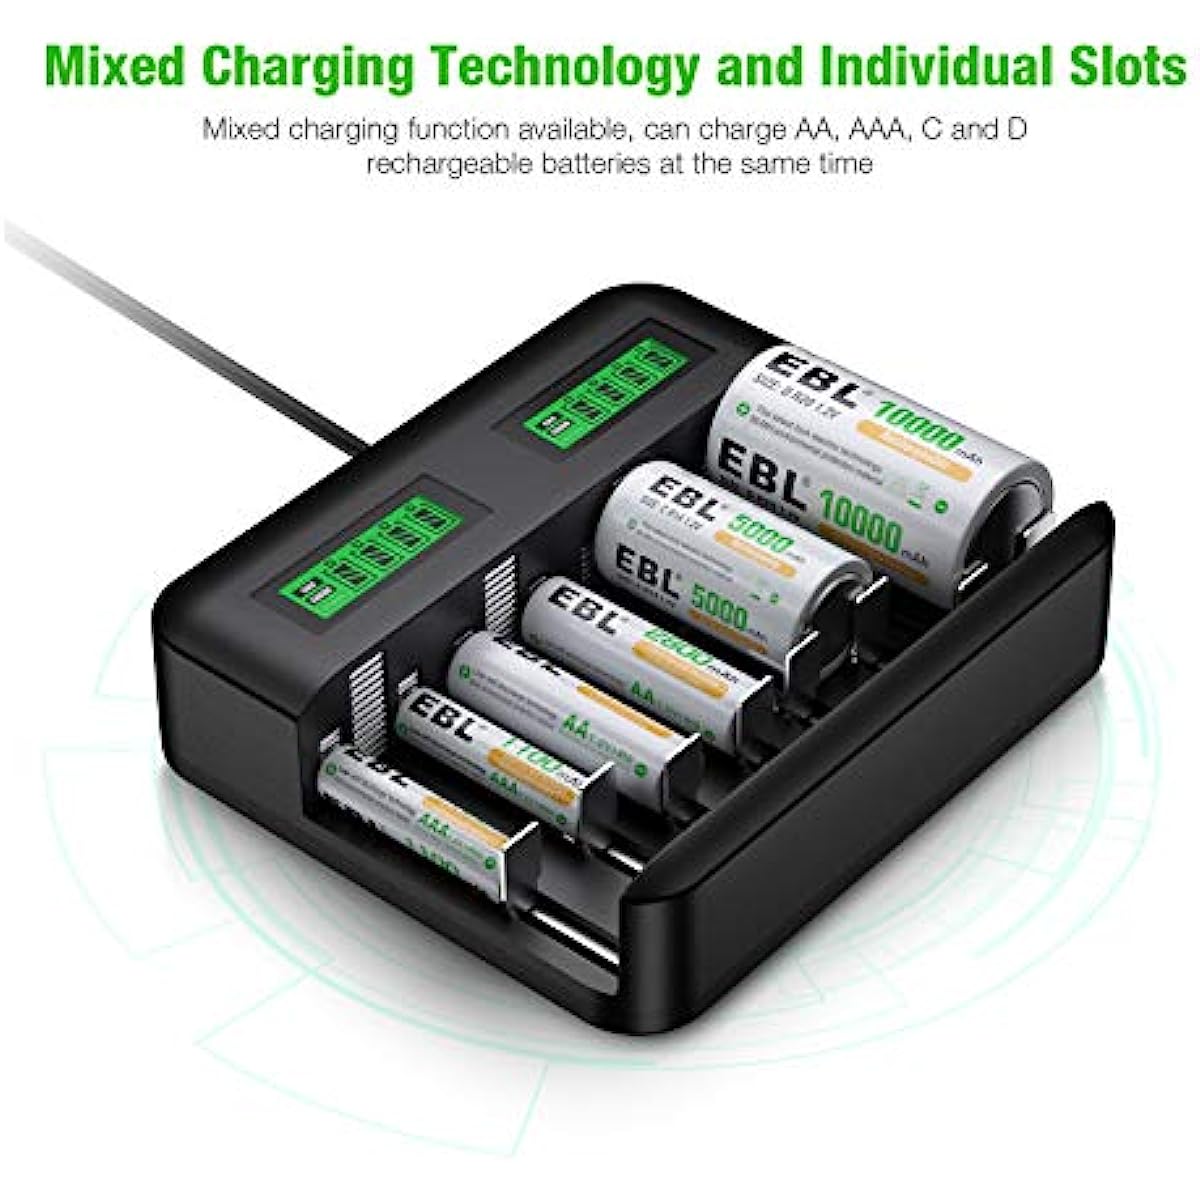 Hseok LCD Universal Battery Charger - 8 Bay AA AAA C D Battery Charger for Rechargeable Batteries Ni-MH AA AAA C D Batteries with 2A USB Port, Type C Input, Fast AA AAA Battery Charger